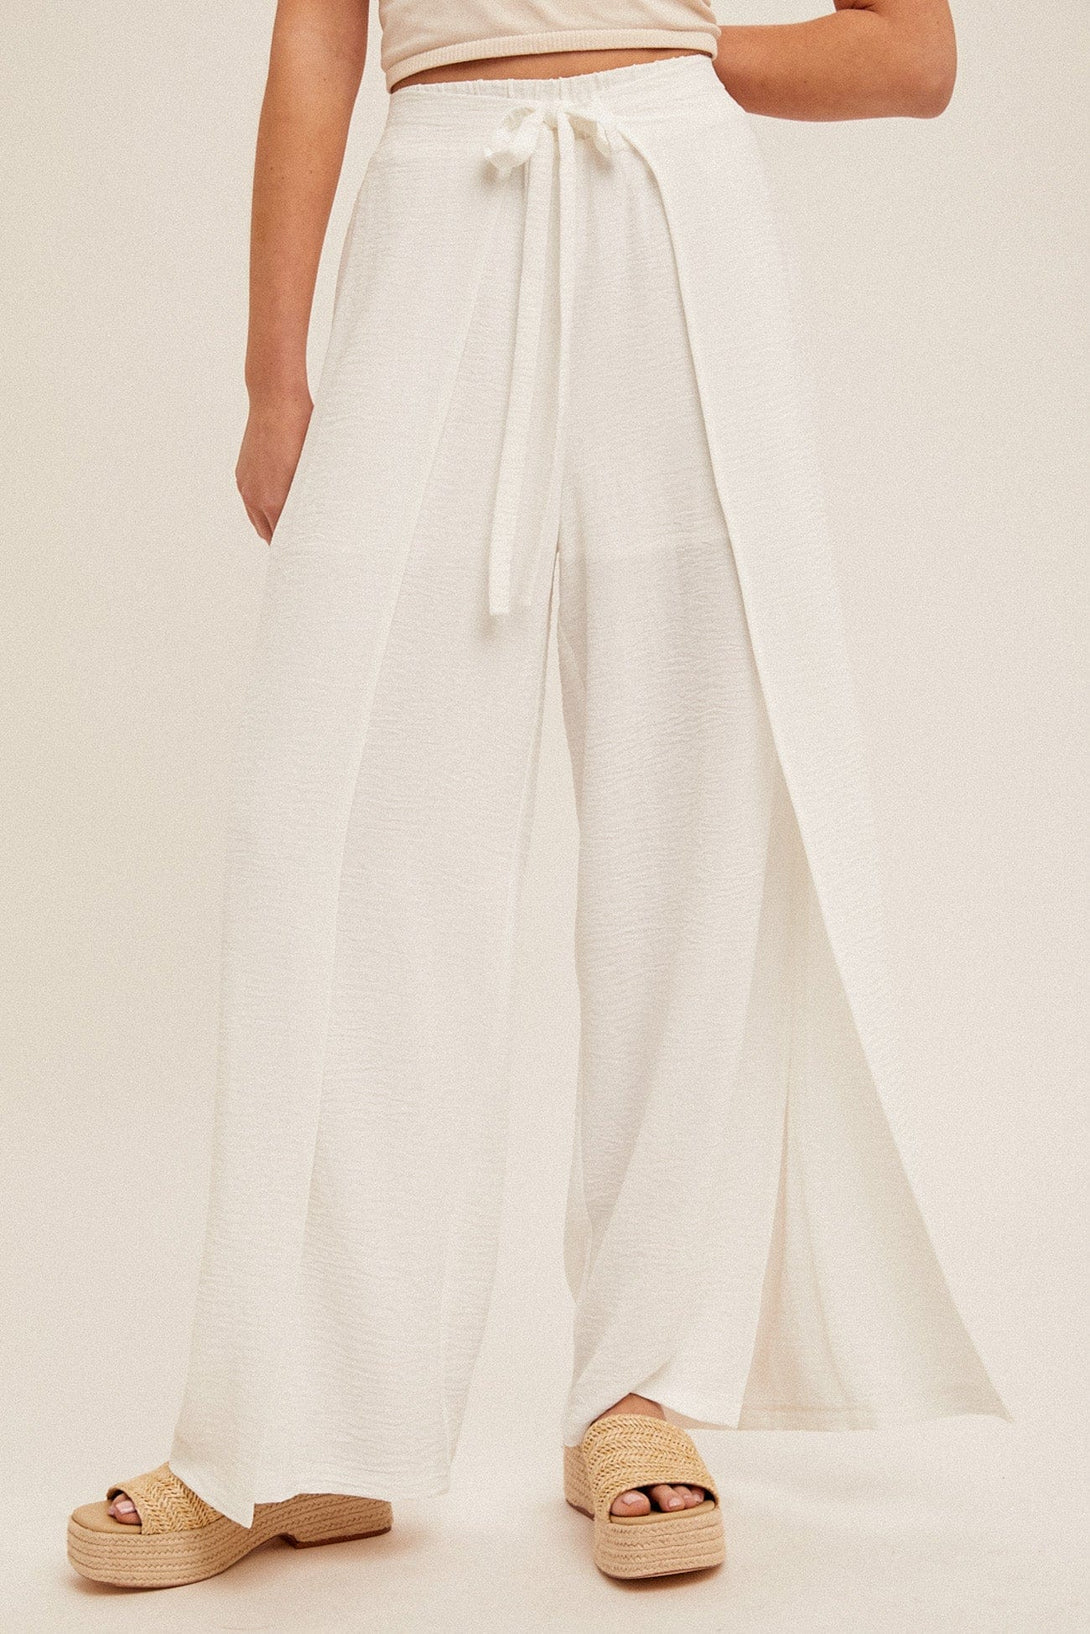 Hem & Thread Overlapping Wrap Front Self-Tie and Elastic Waist Wide Leg Pants